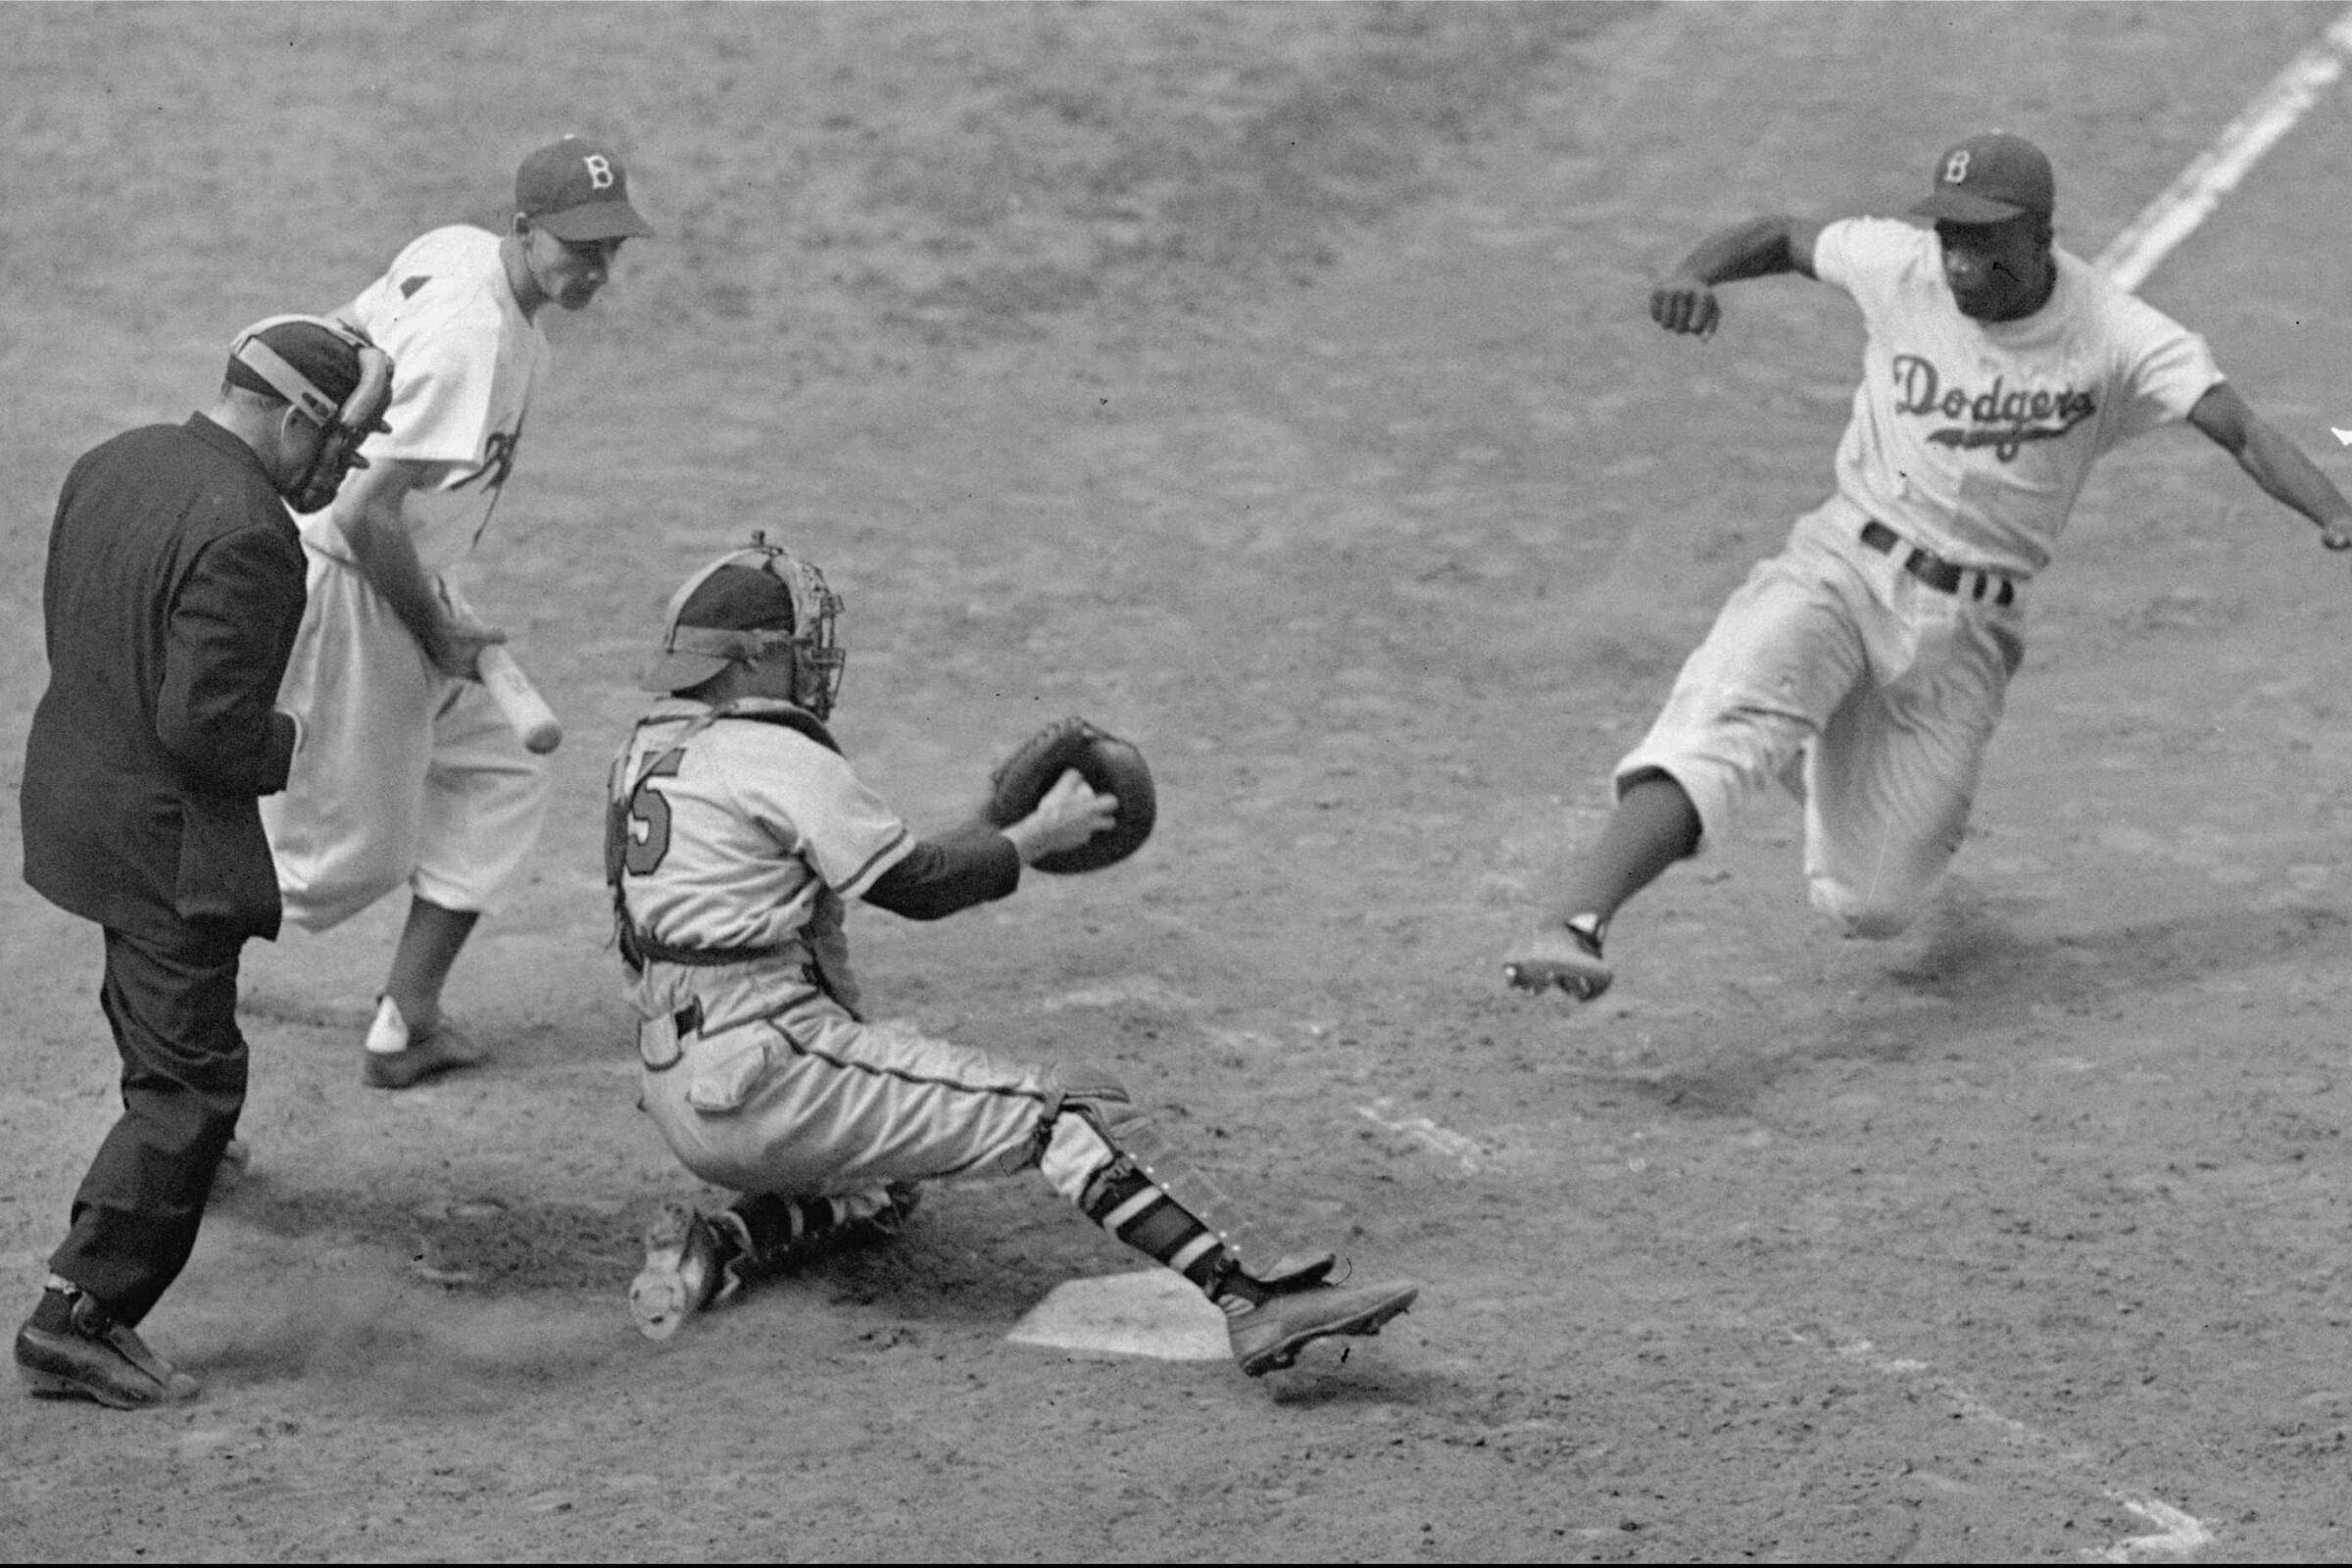 Jackie Robinsonsteals home plate against the Boston Braves at Ebbets Field in 1948.